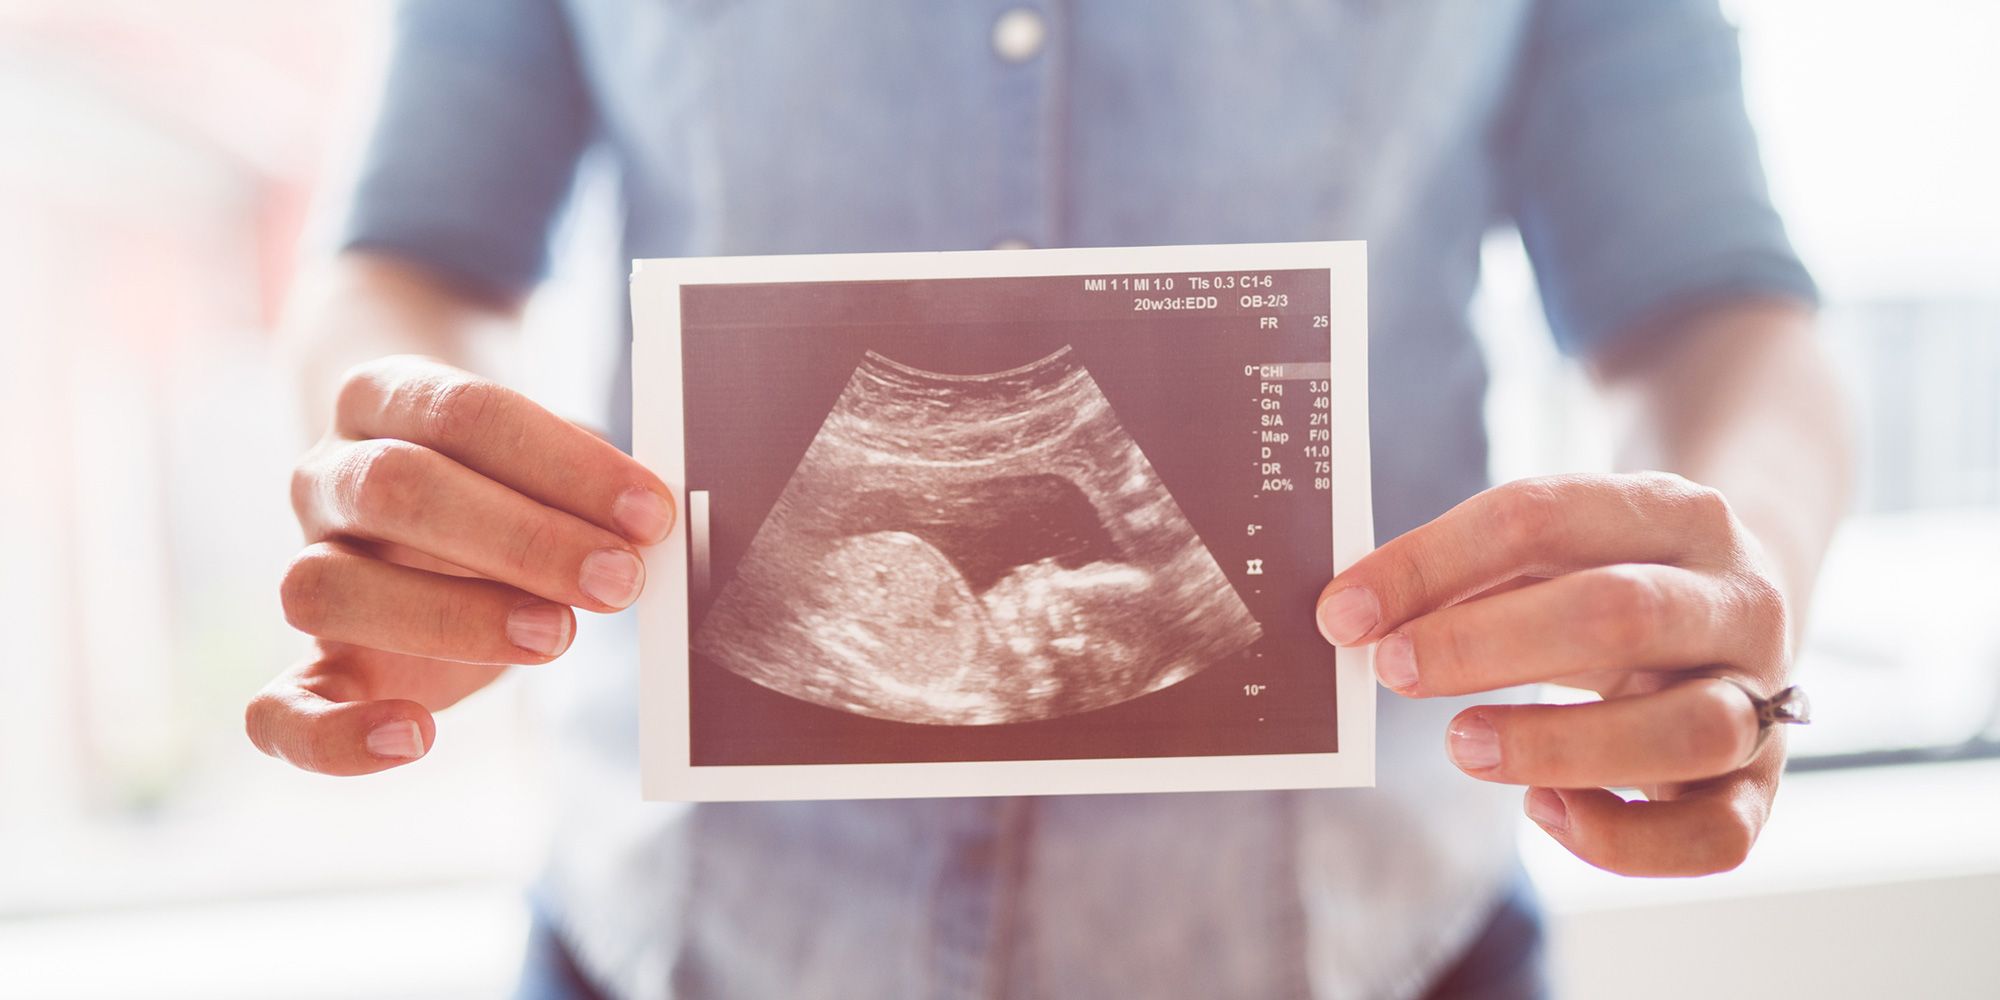 11 women share the surprising pregnancy symptoms they experienced